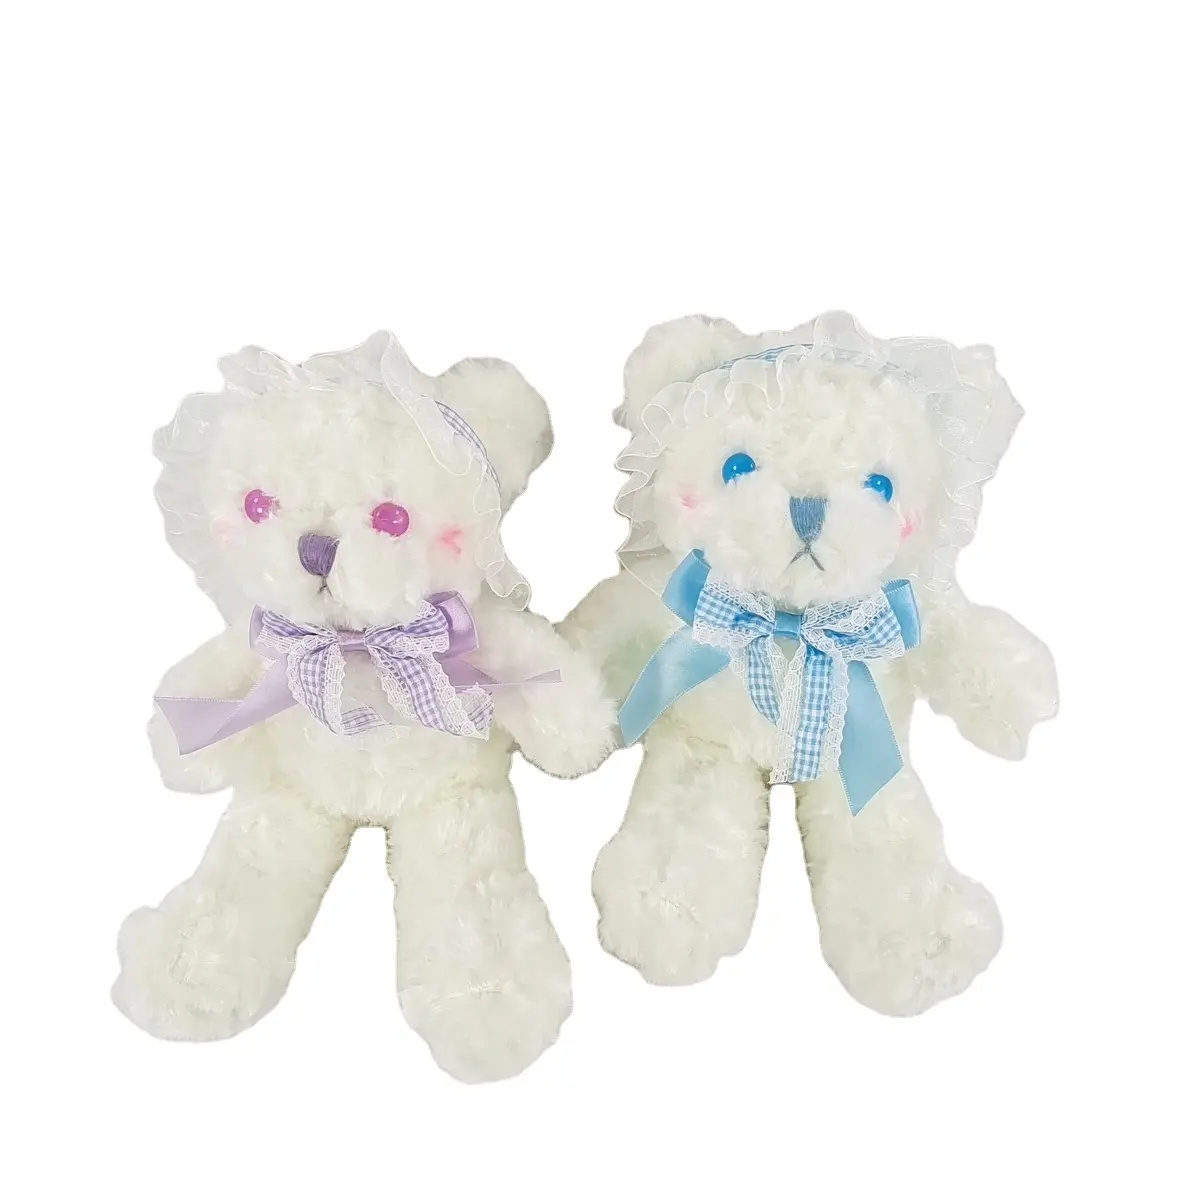 25cm Lace Bow Tie Fluffy Bear Stuffed Animal Toys Plush Bear Kids Toys Children's Gifts Claw Machine